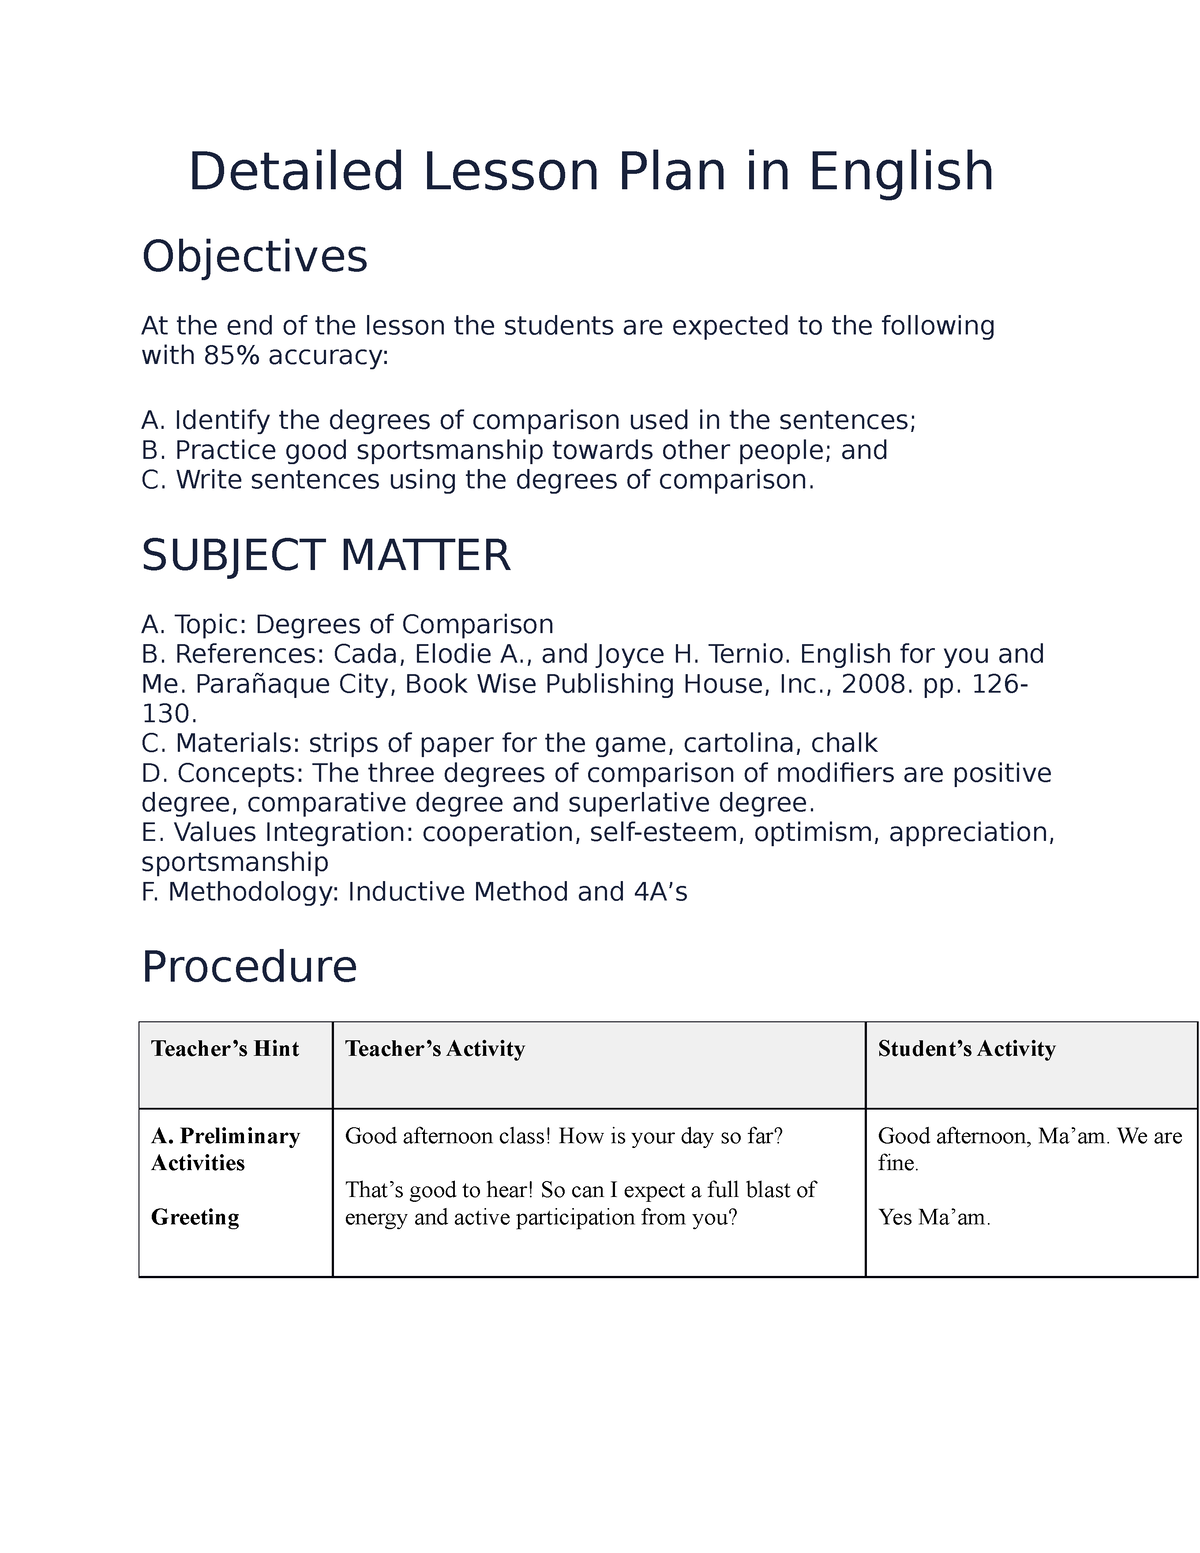 detailed-lesson-plan-in-english-detailed-lesson-plan-in-english-objectives-at-the-end-of-the